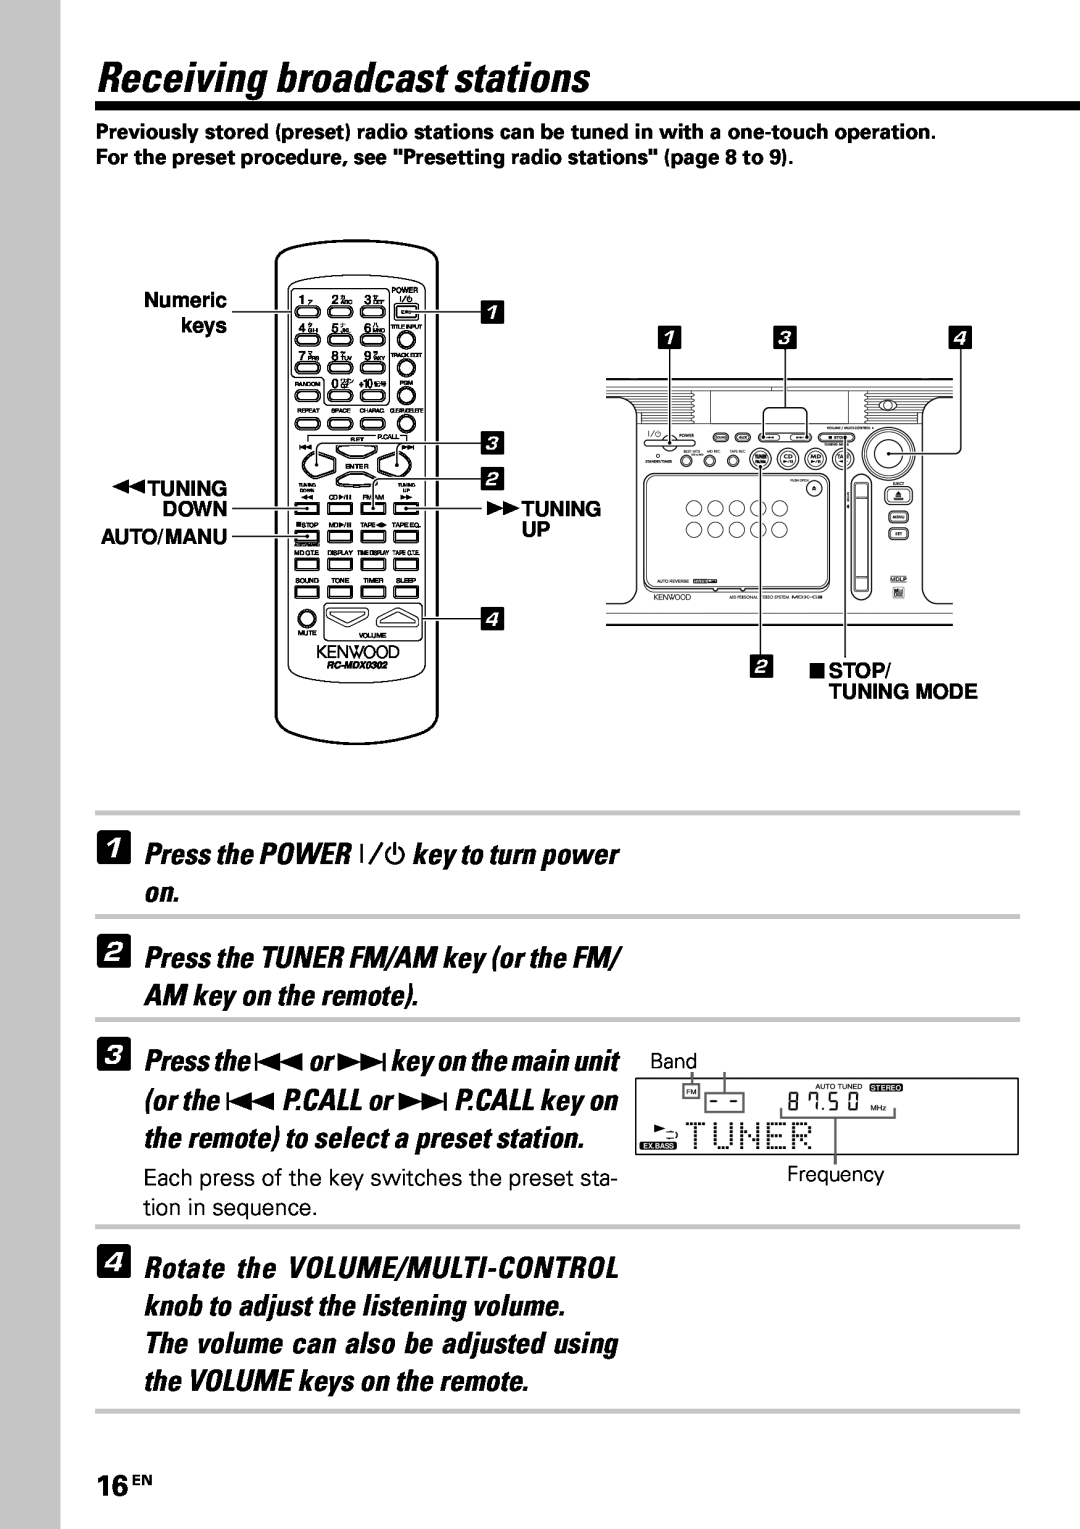 Kenwood MDX-G3 instruction manual Receiving broadcast stations, 1 1 3 3, 3Press the 4or ¢key on the main unit, 16 EN 